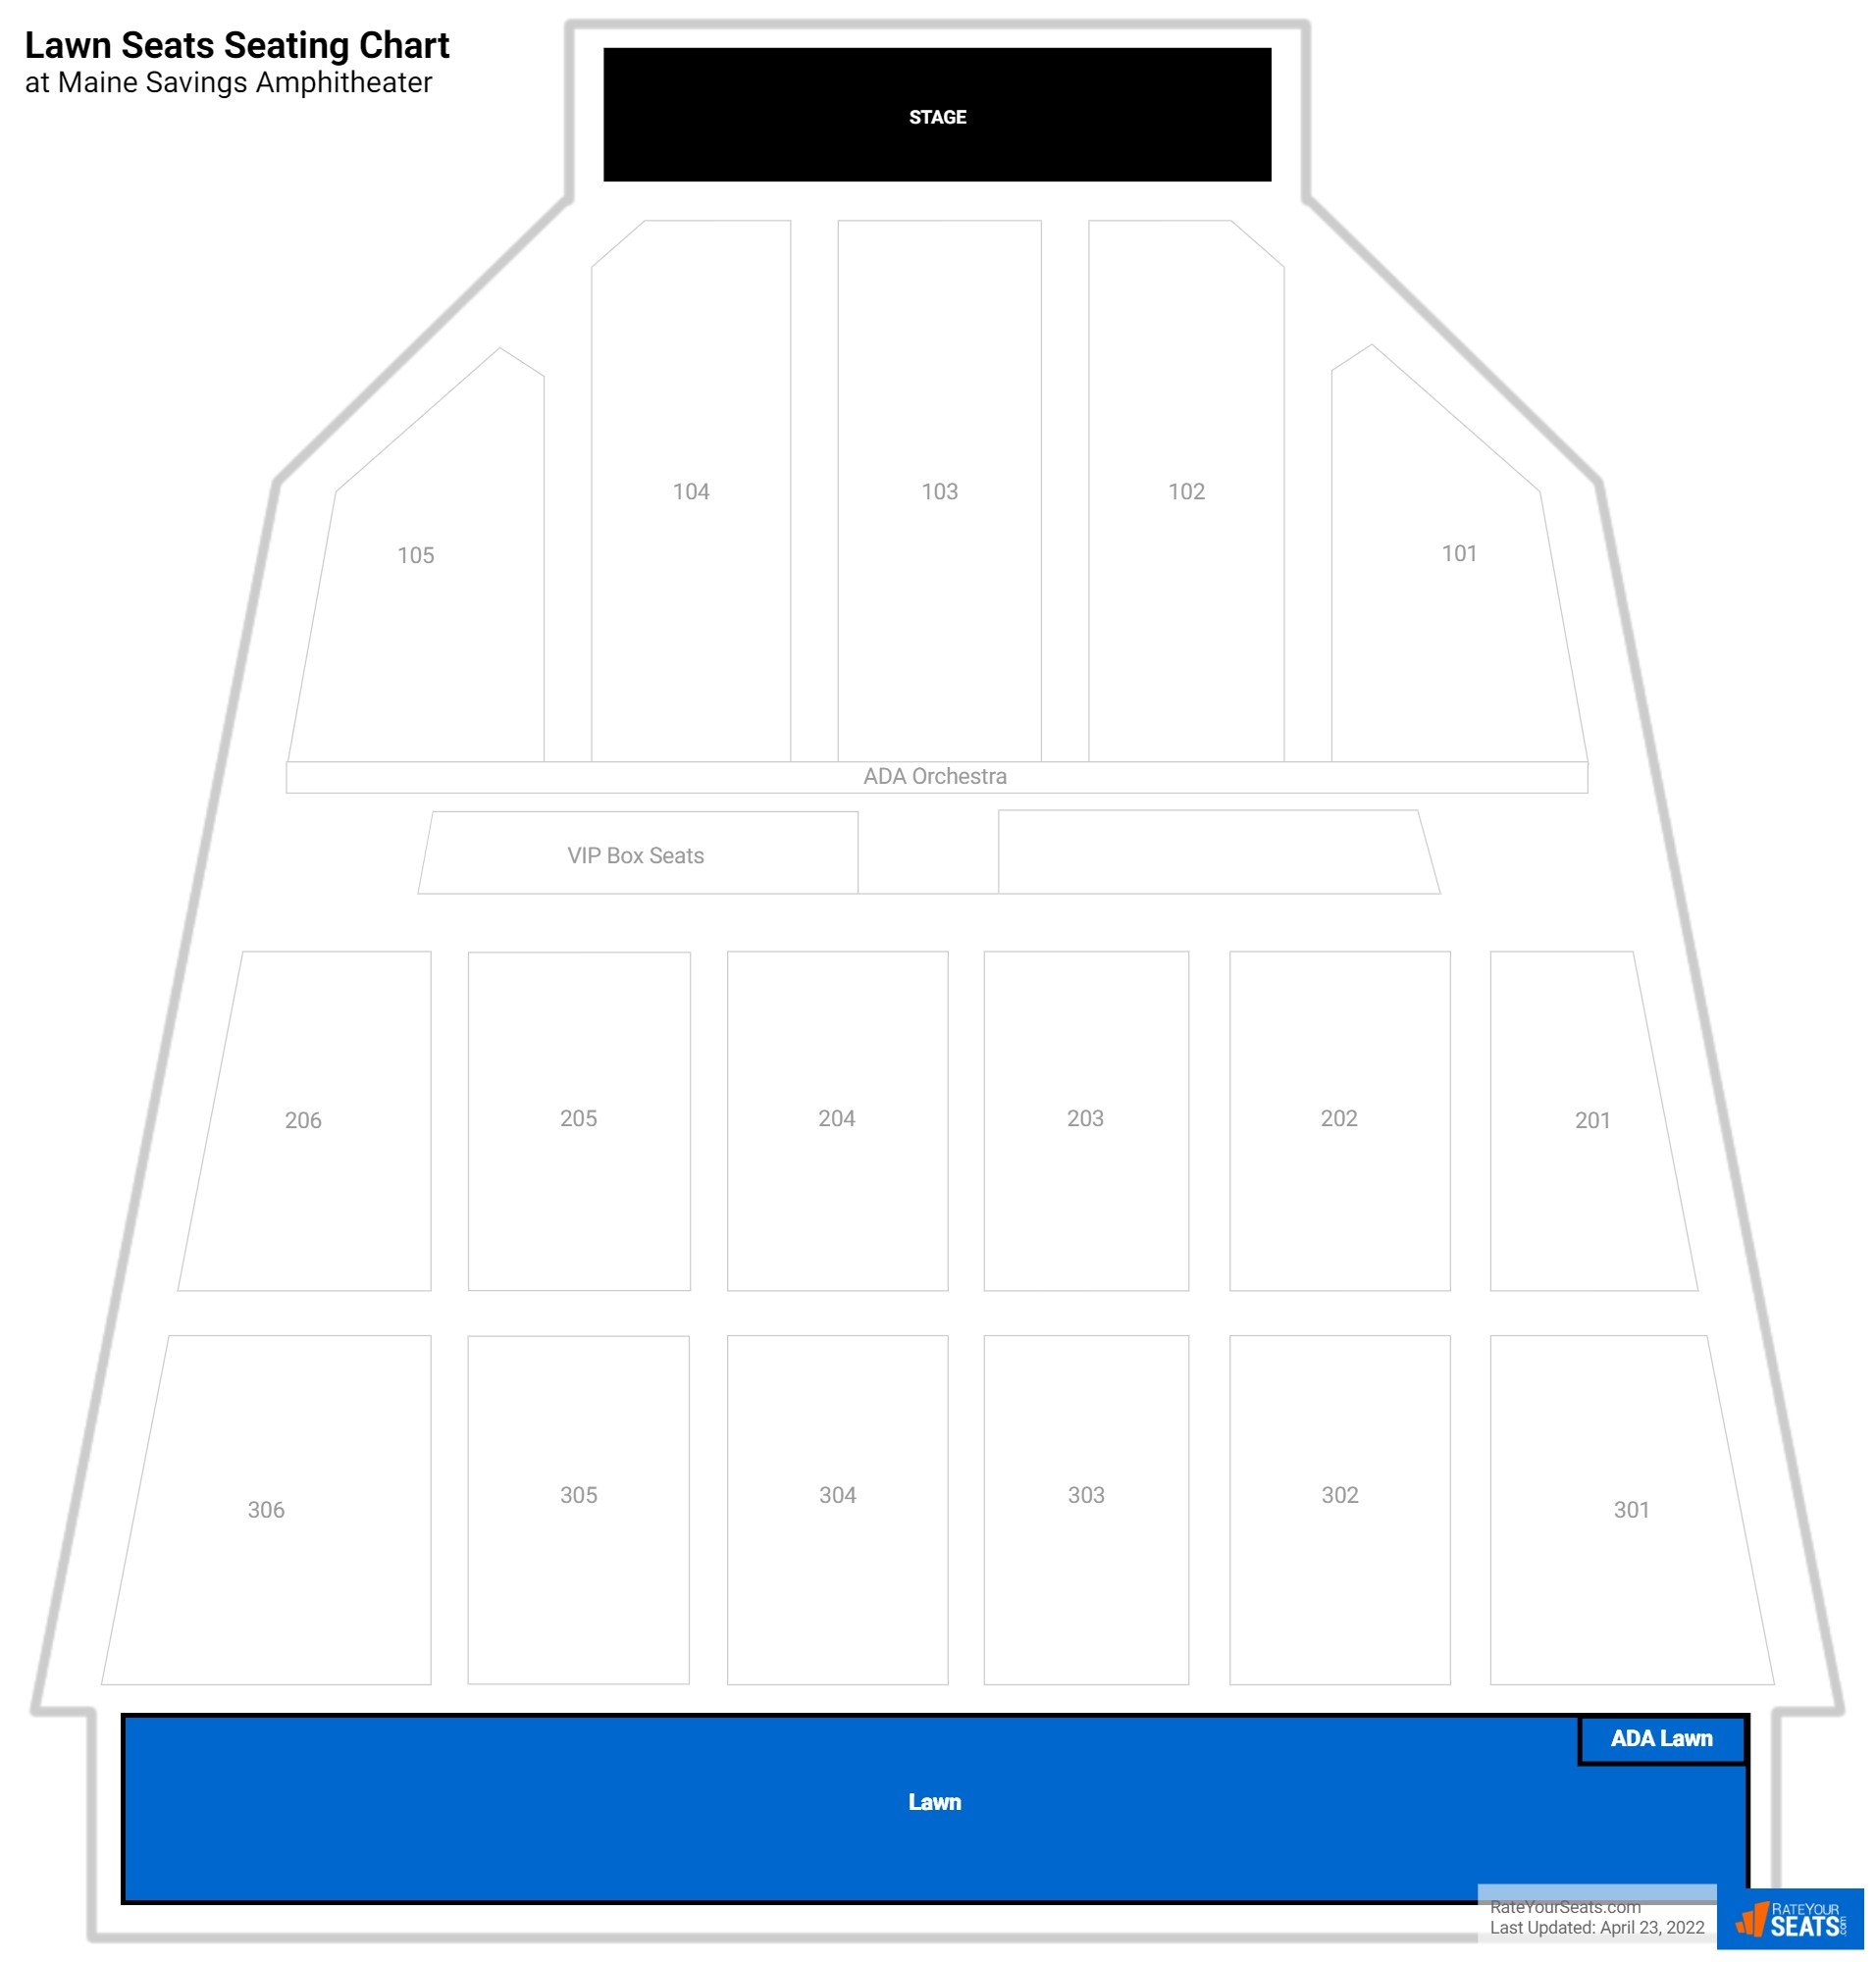 Concert Lawn Seats Seating Chart at Maine Savings Amphitheater